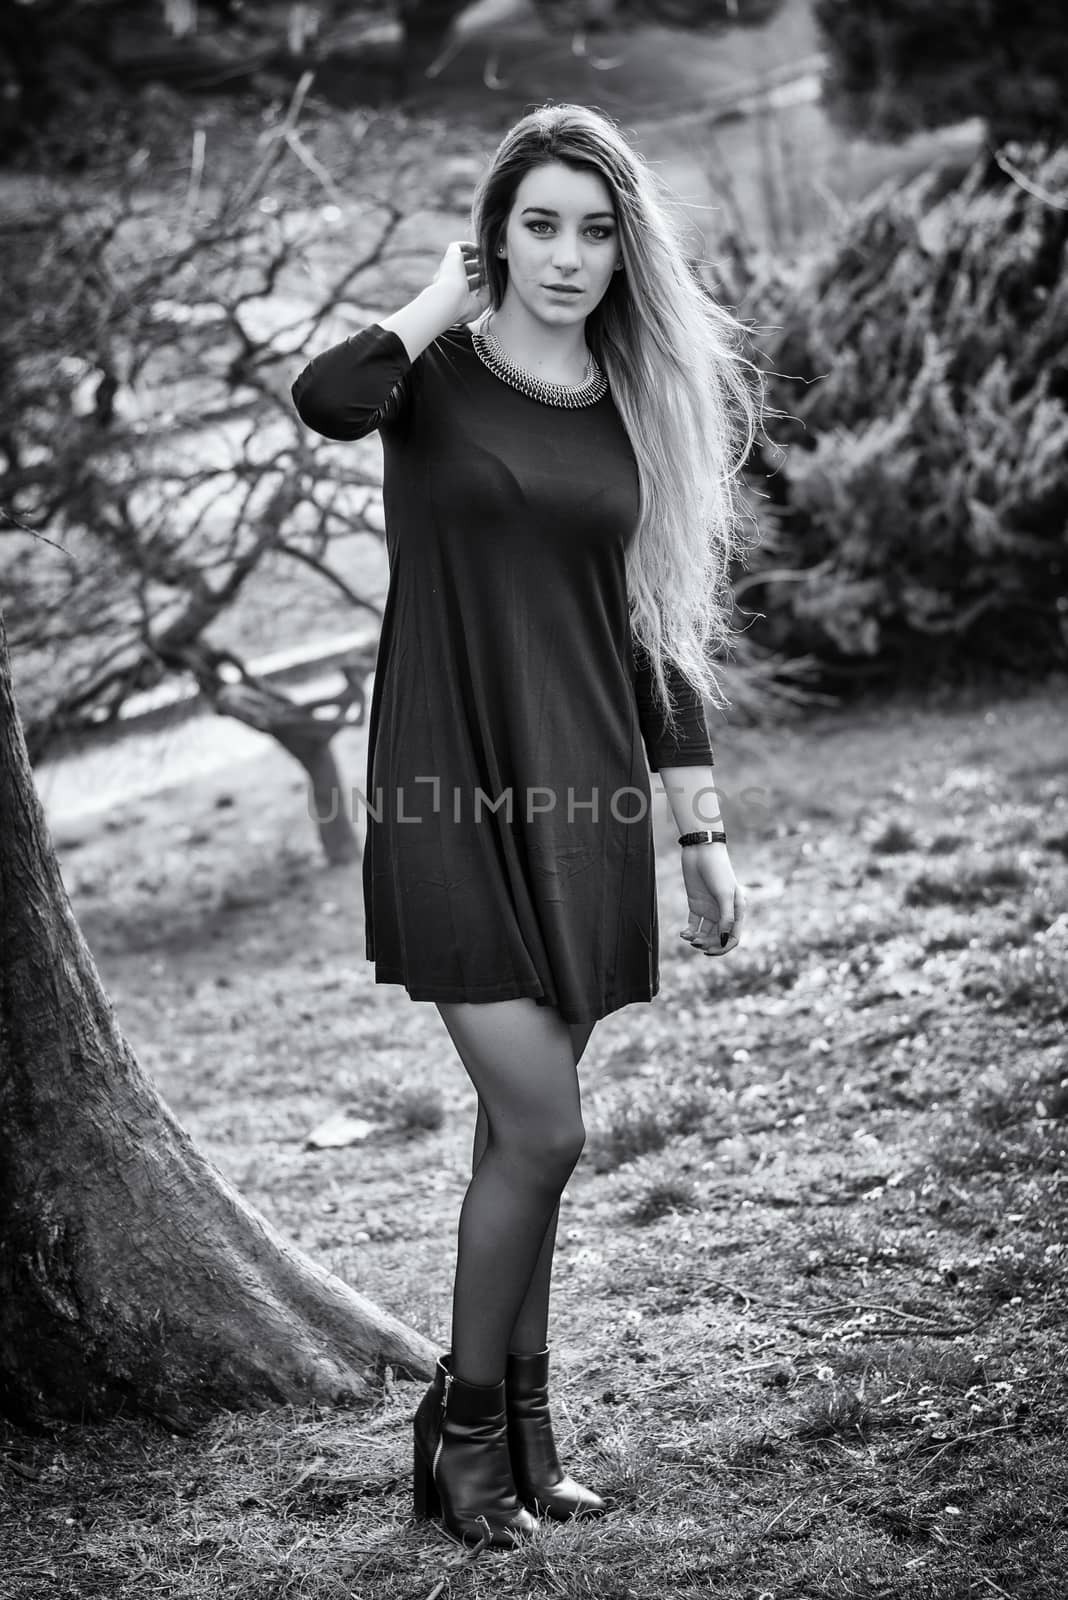 Pretty blonde young woman outdoor in city park, wearing short black dress